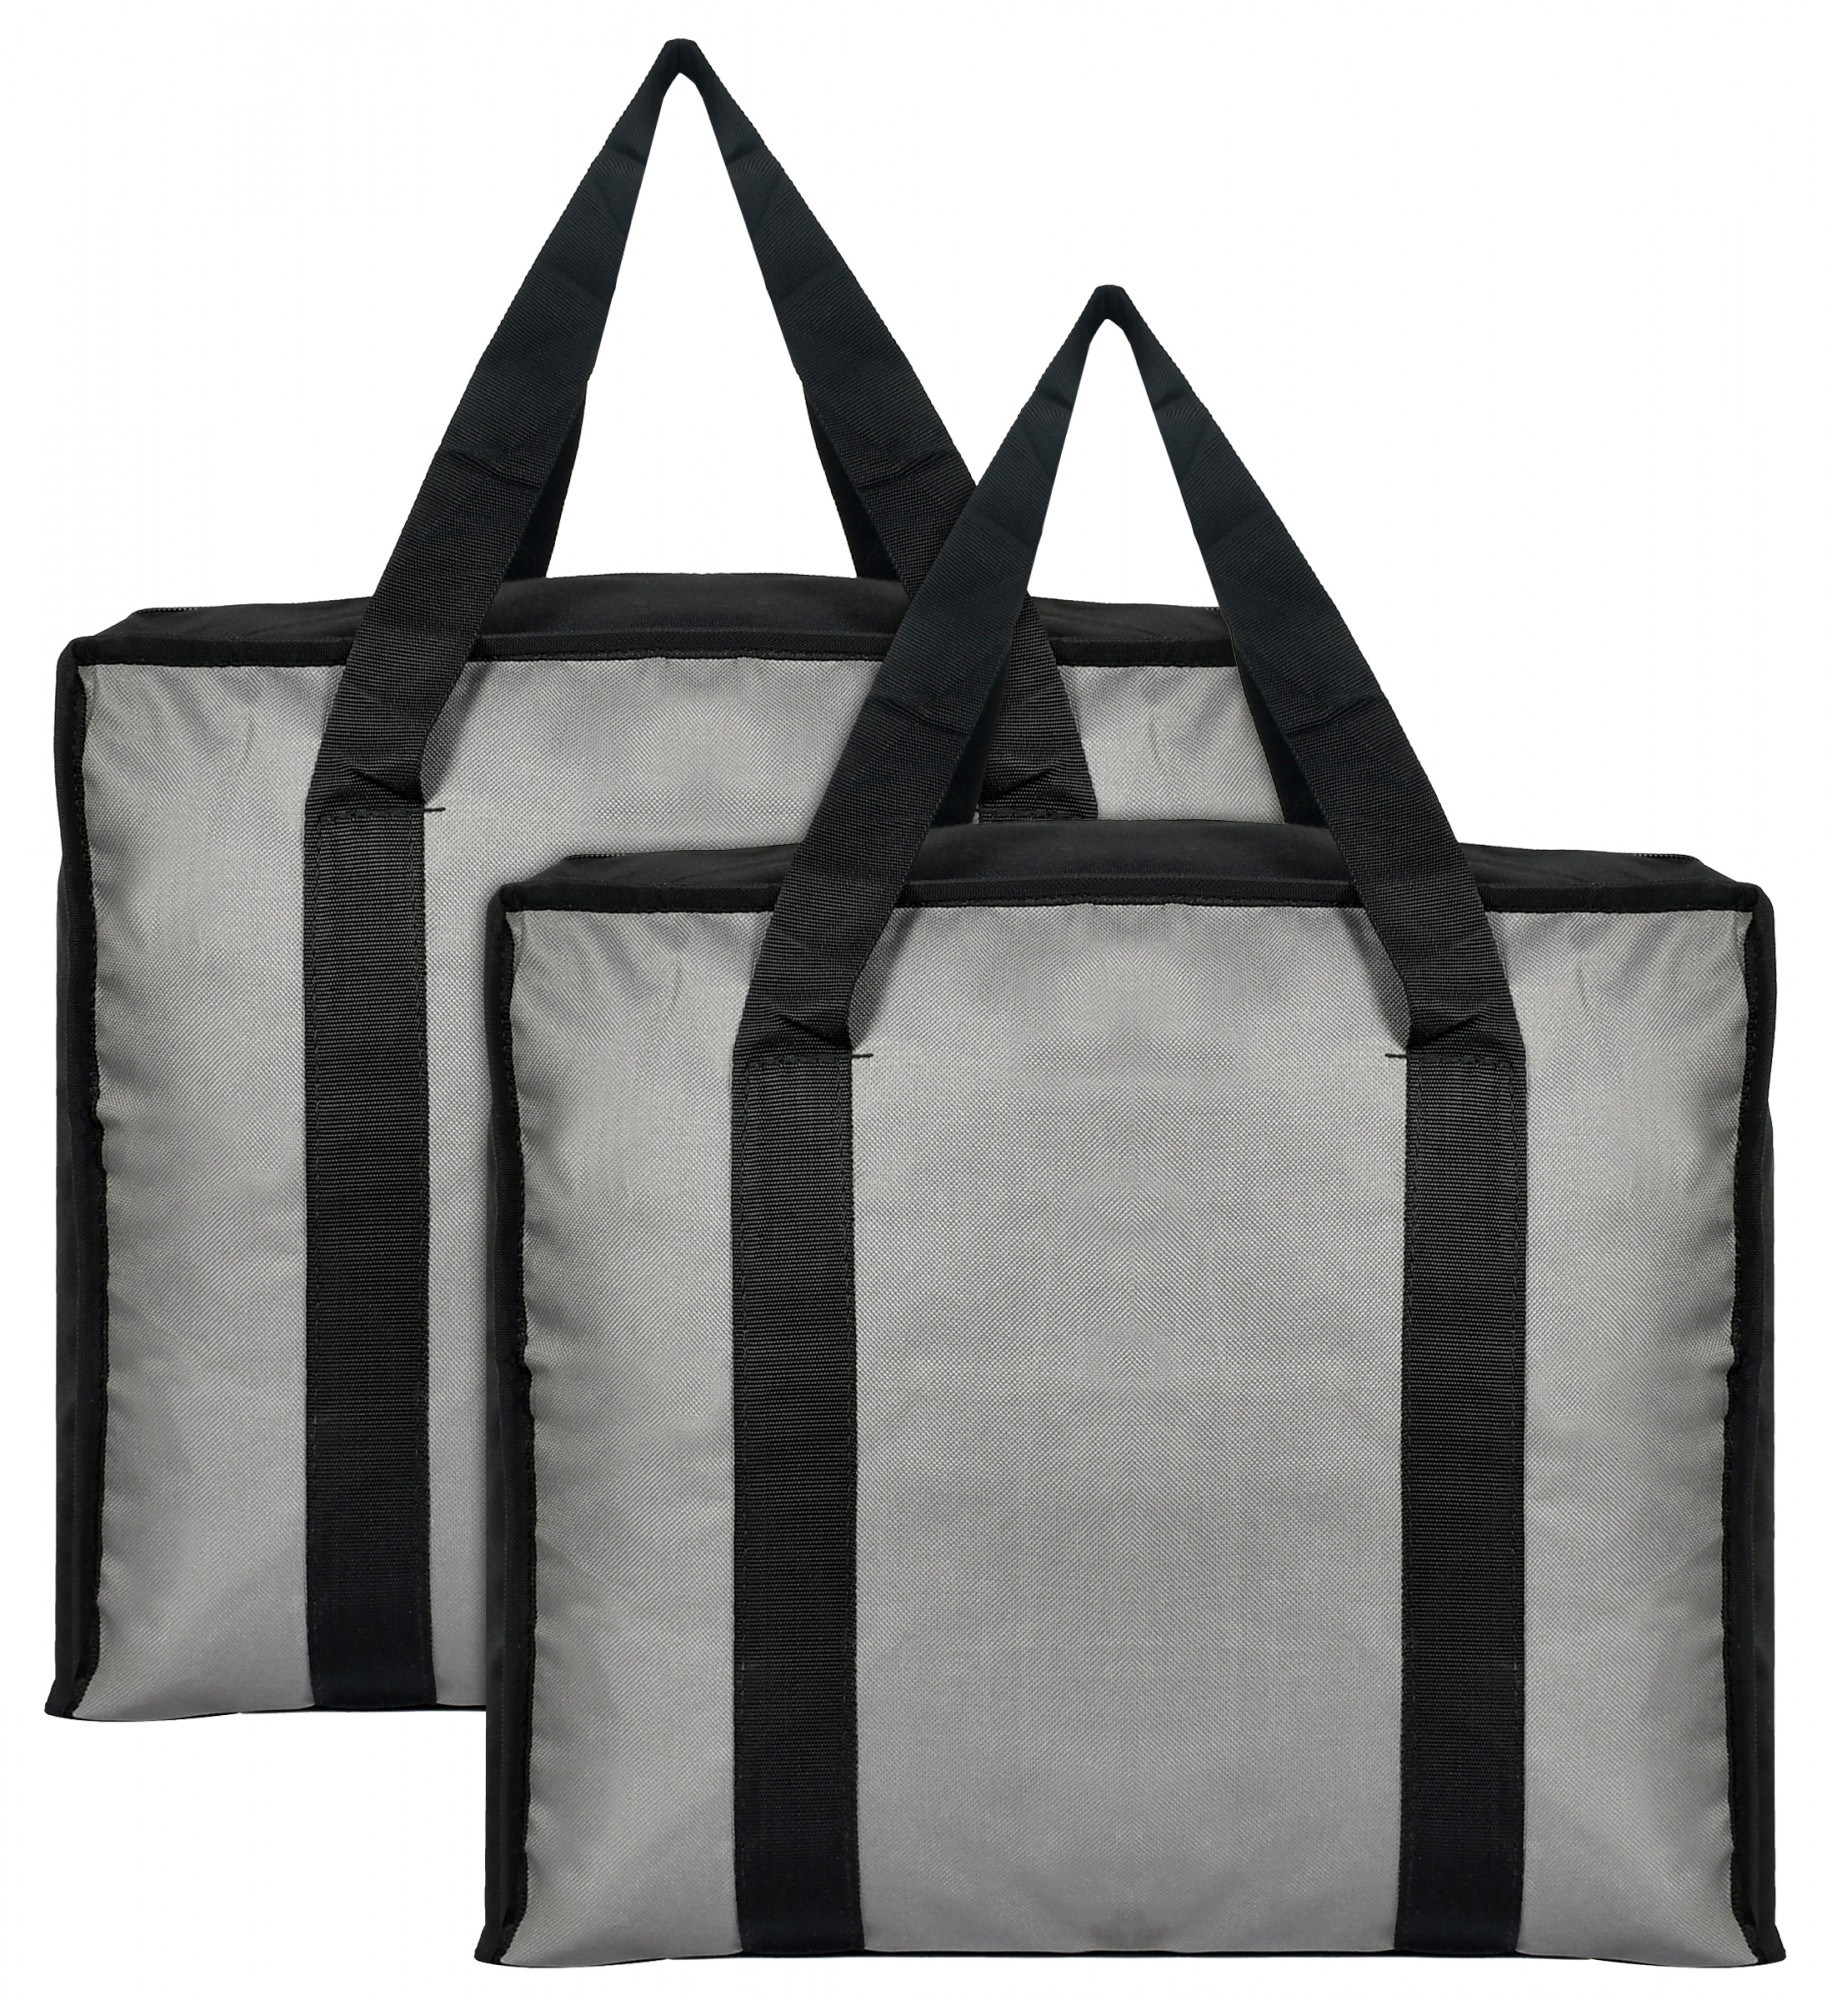 Kuber Industries Small Size Canvas Shopping Bags for Carry Milk Grocery Fruits Vegetable with Reinforced Handles jhola Bag (Black & Grey)